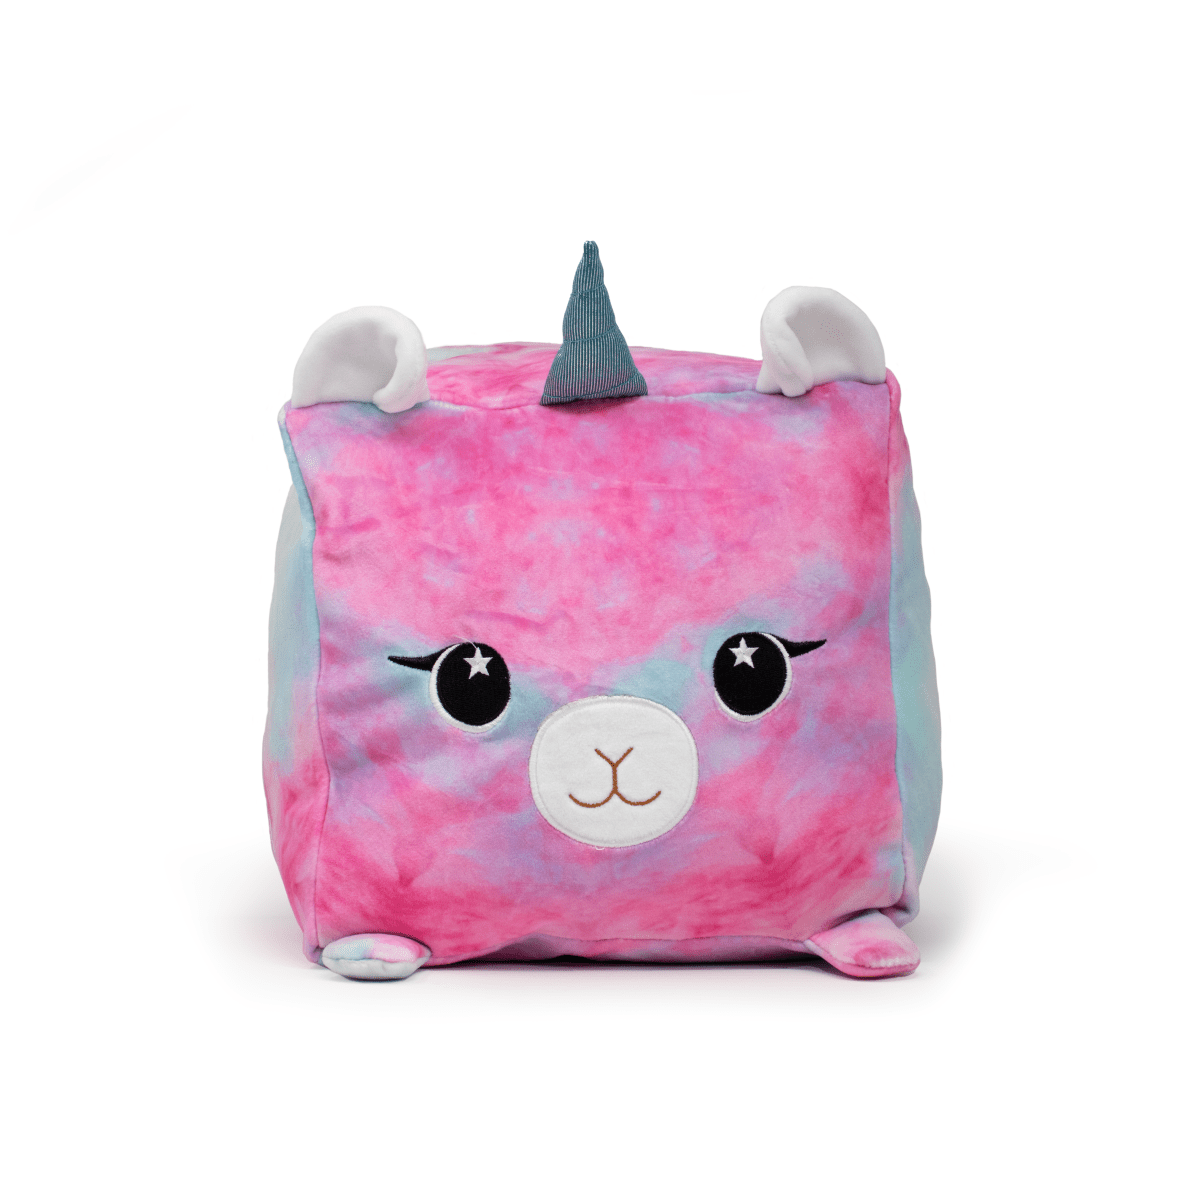 Gaia the Llamacorn plush toy with pink and blue fur, unicorn horn, and sparkling eyes from Moosh-Moosh SQUARED² Collection.